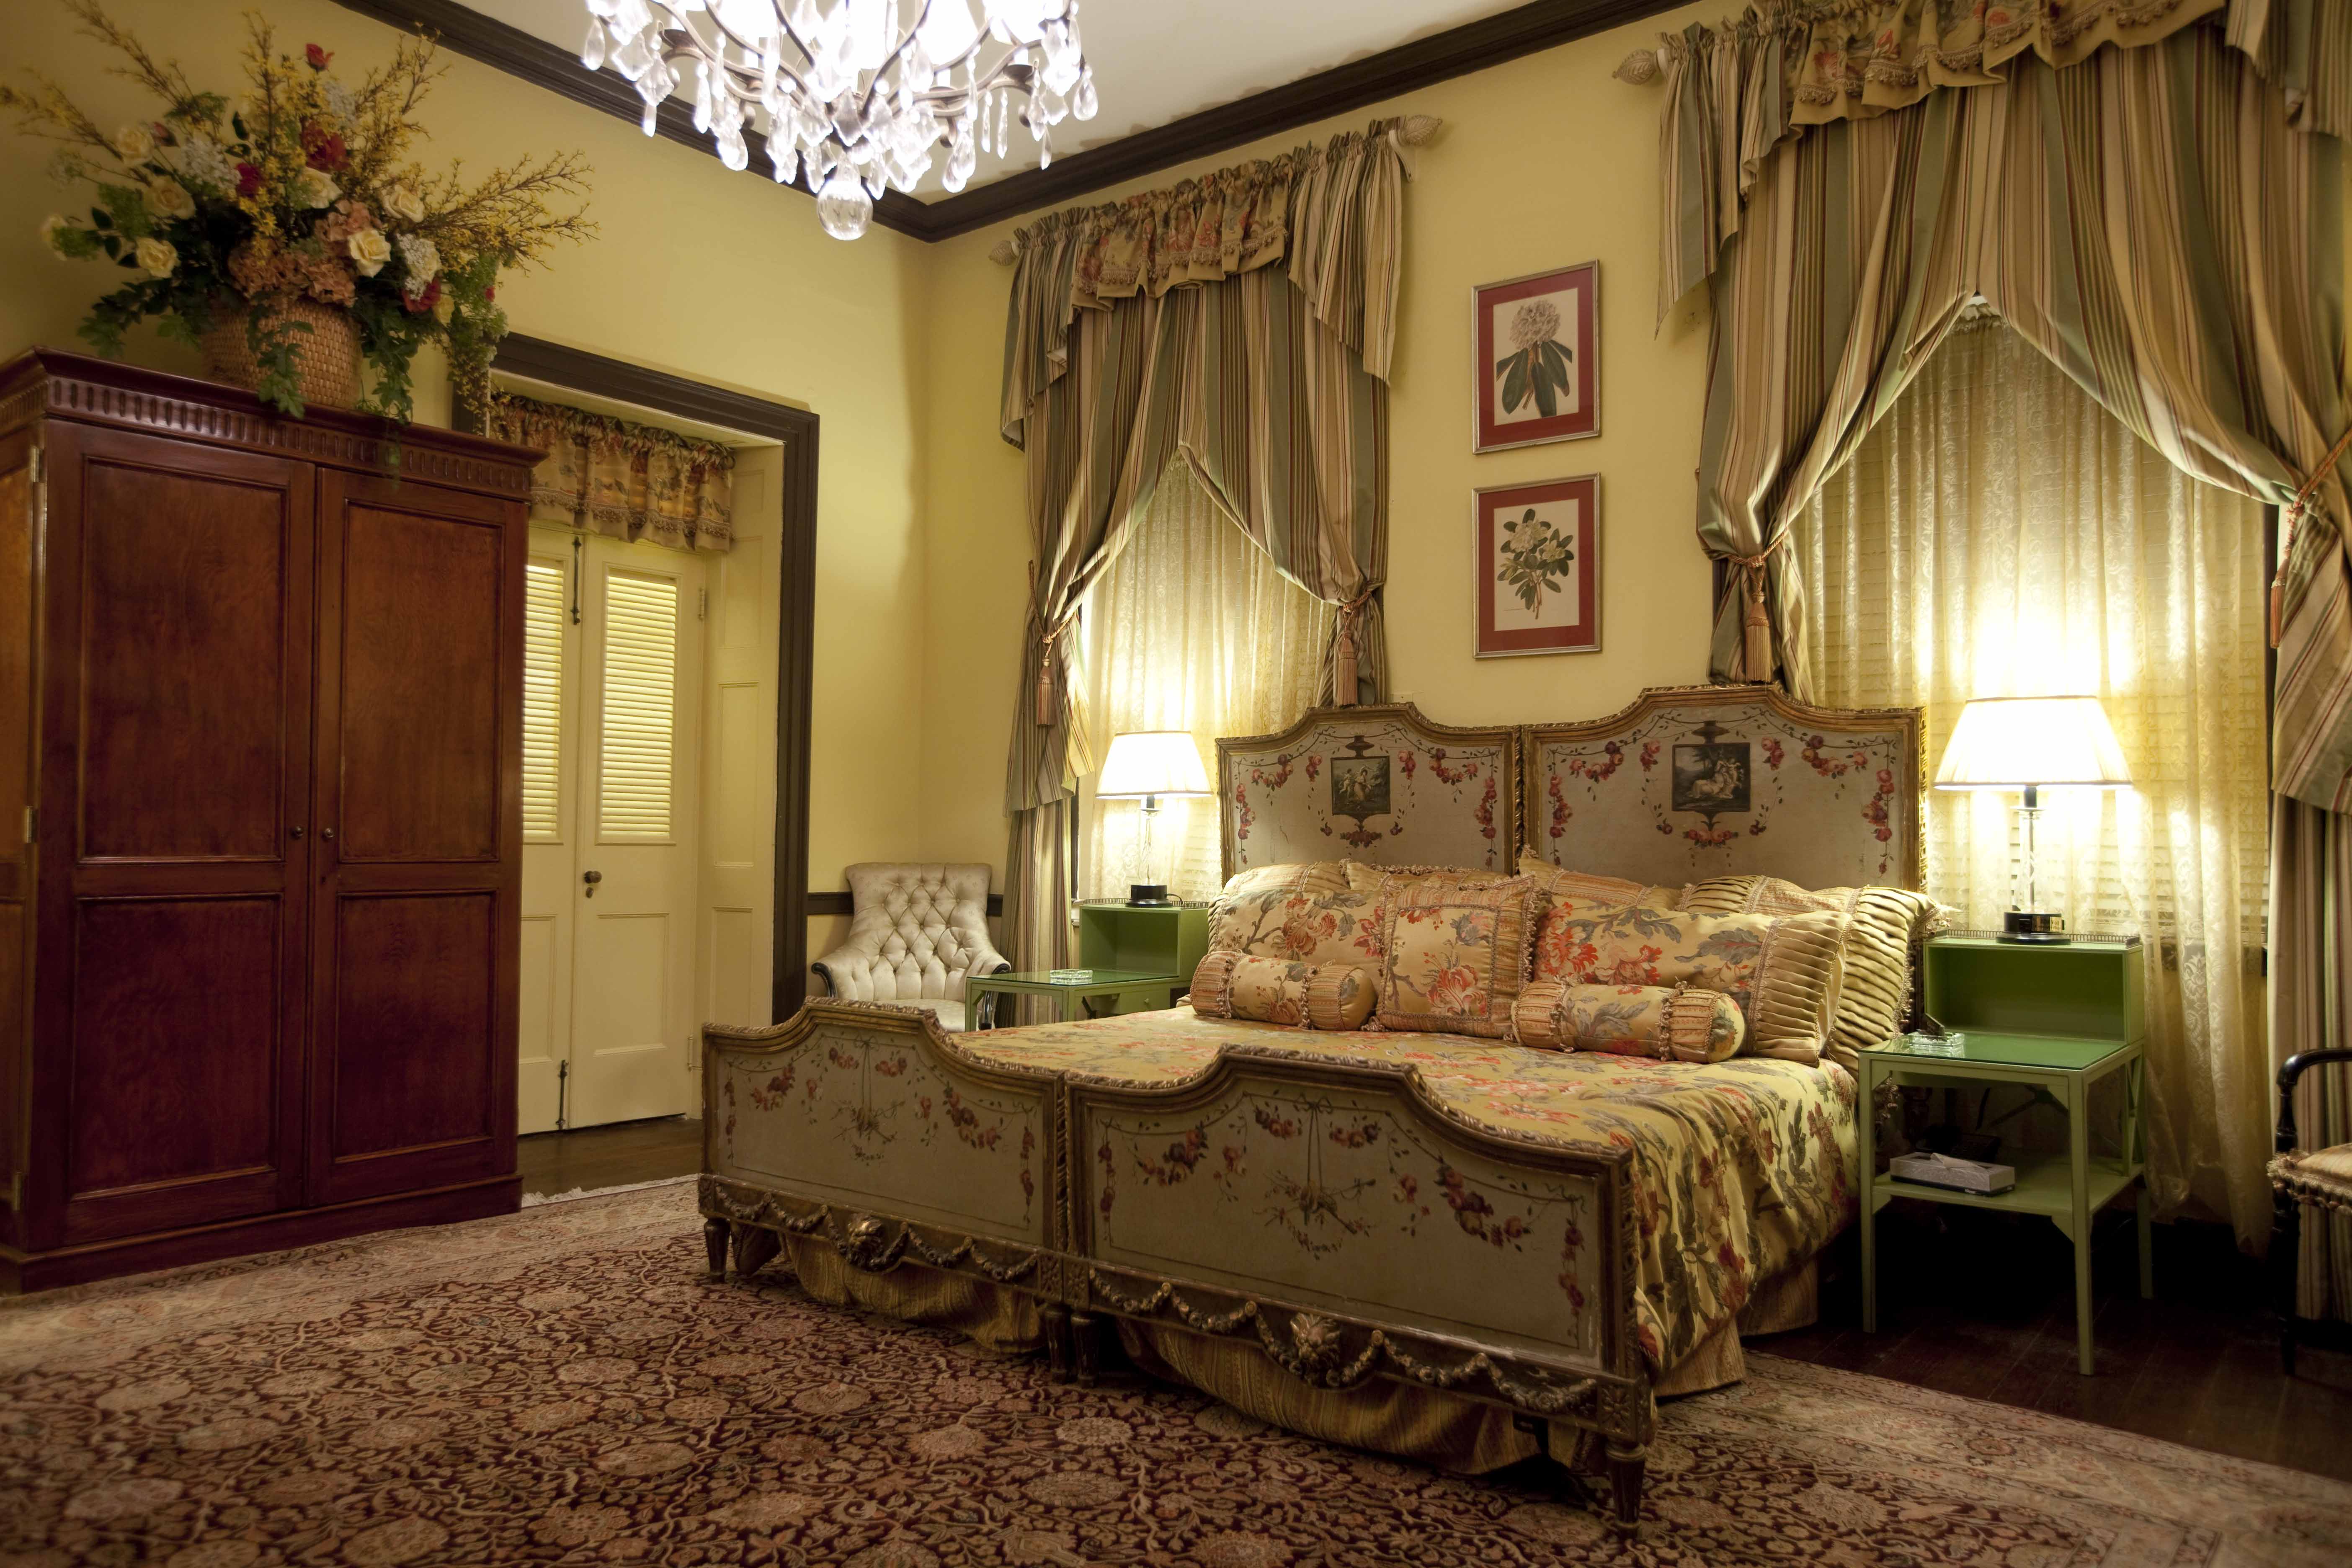 Graycliff Hotel’s 20 rooms and suites are elegantly appointed with antiques and luxury amenities.